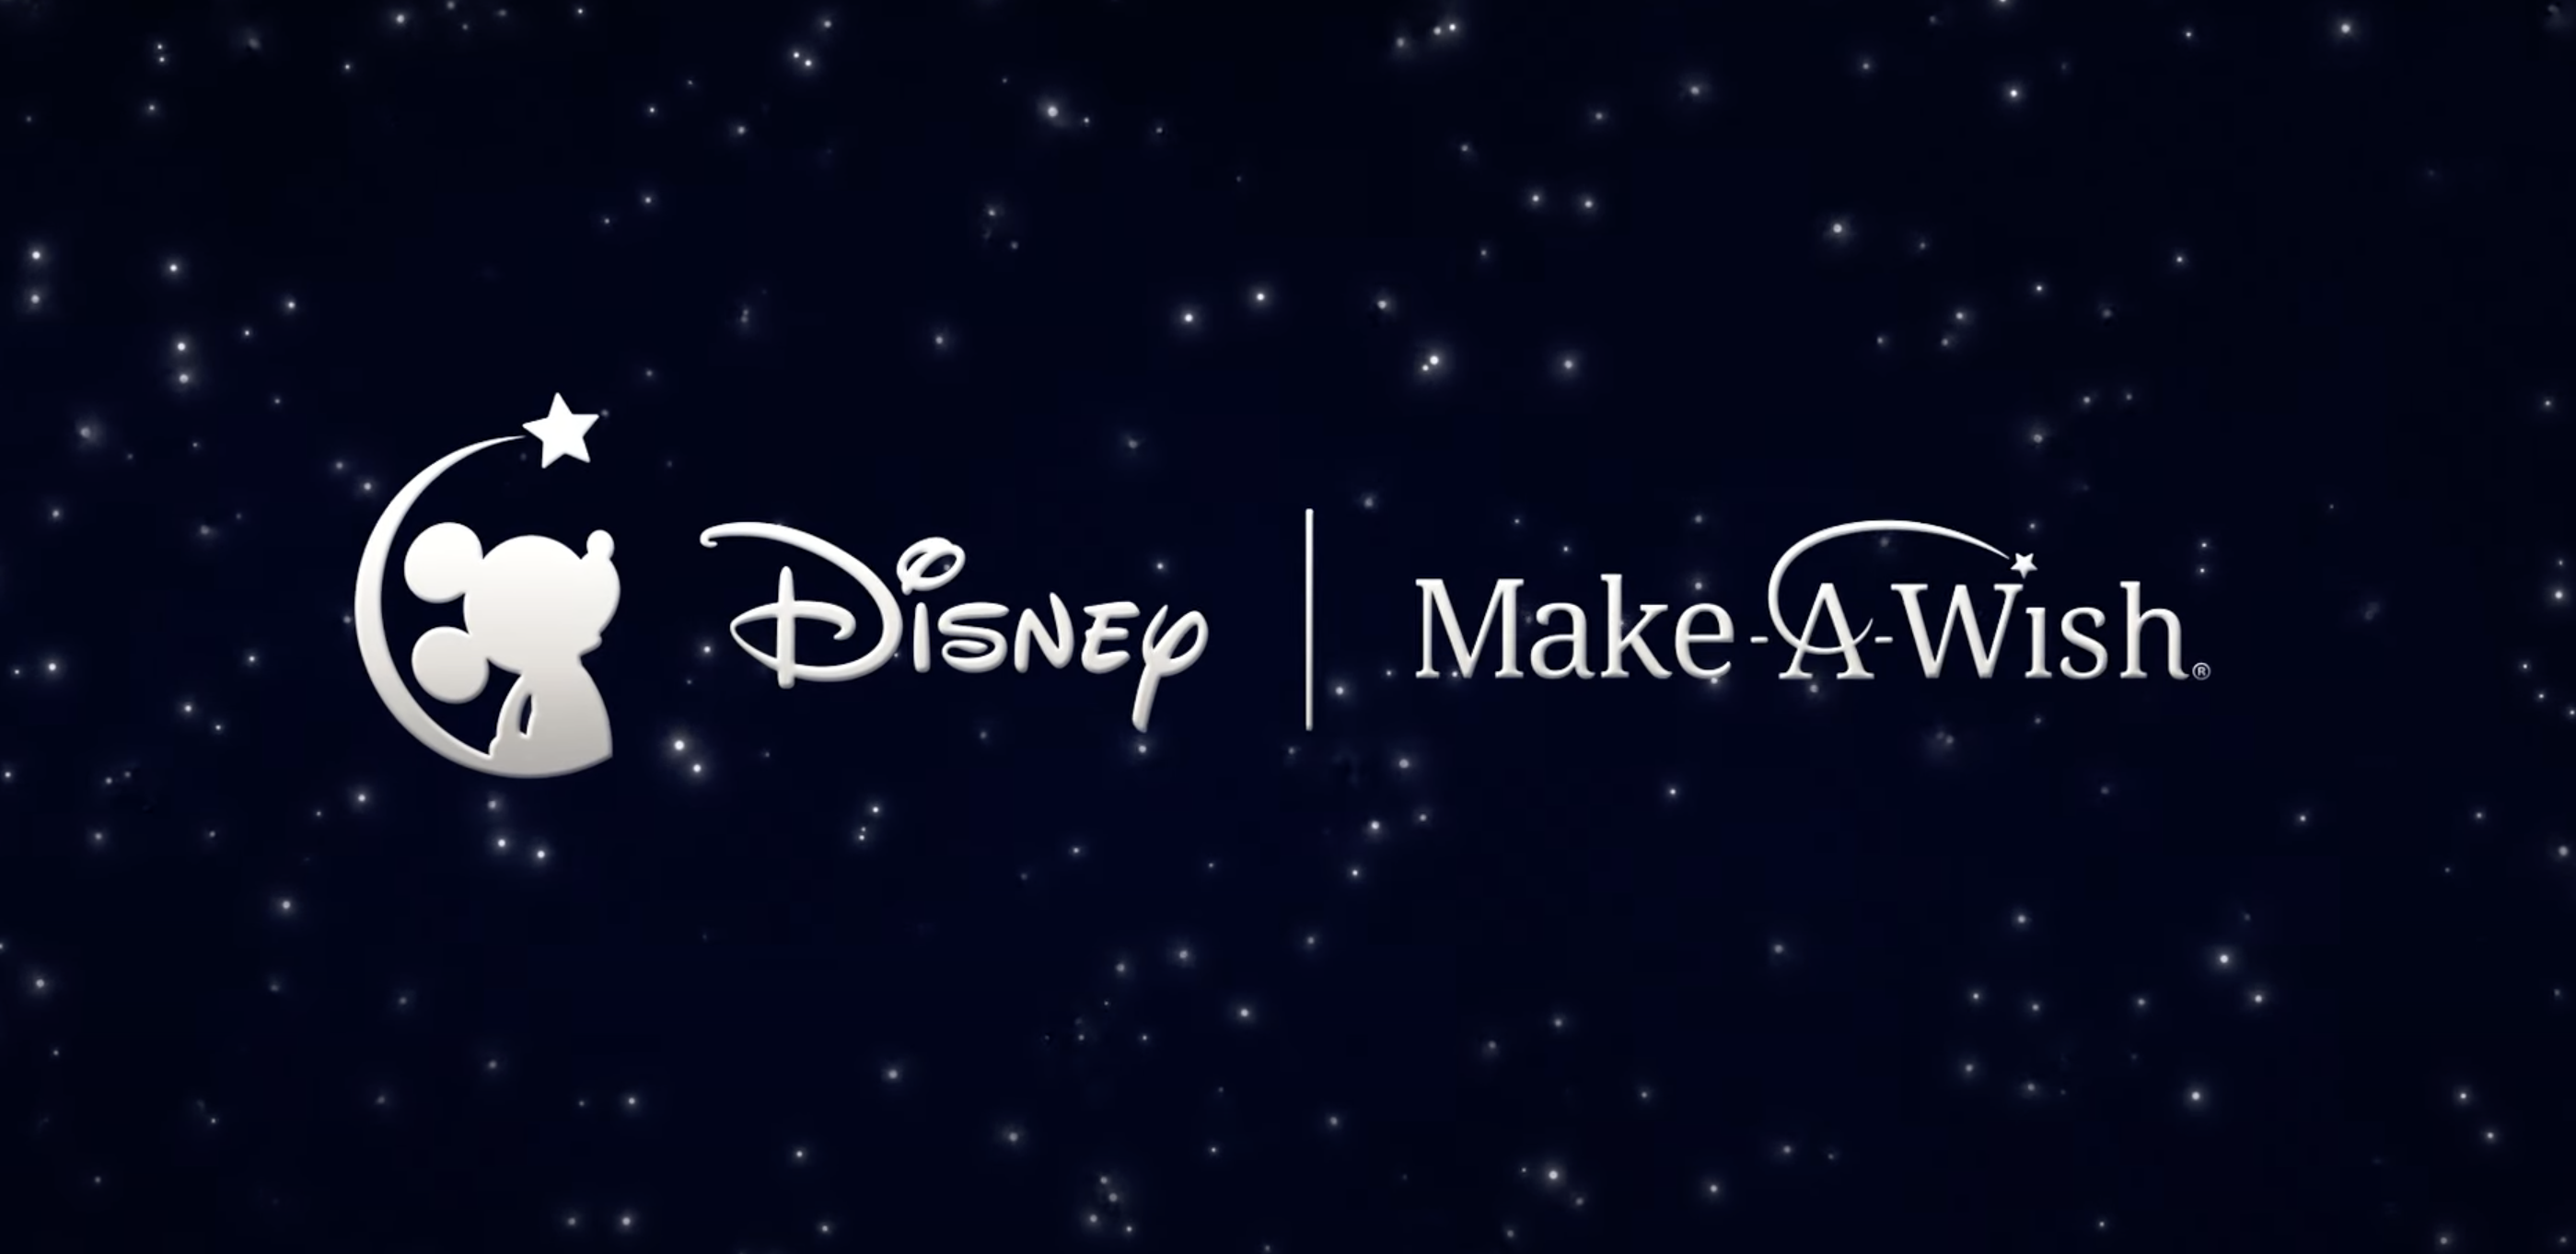 Disney Launches Wish Together Campaign to Support Make-A-Wish